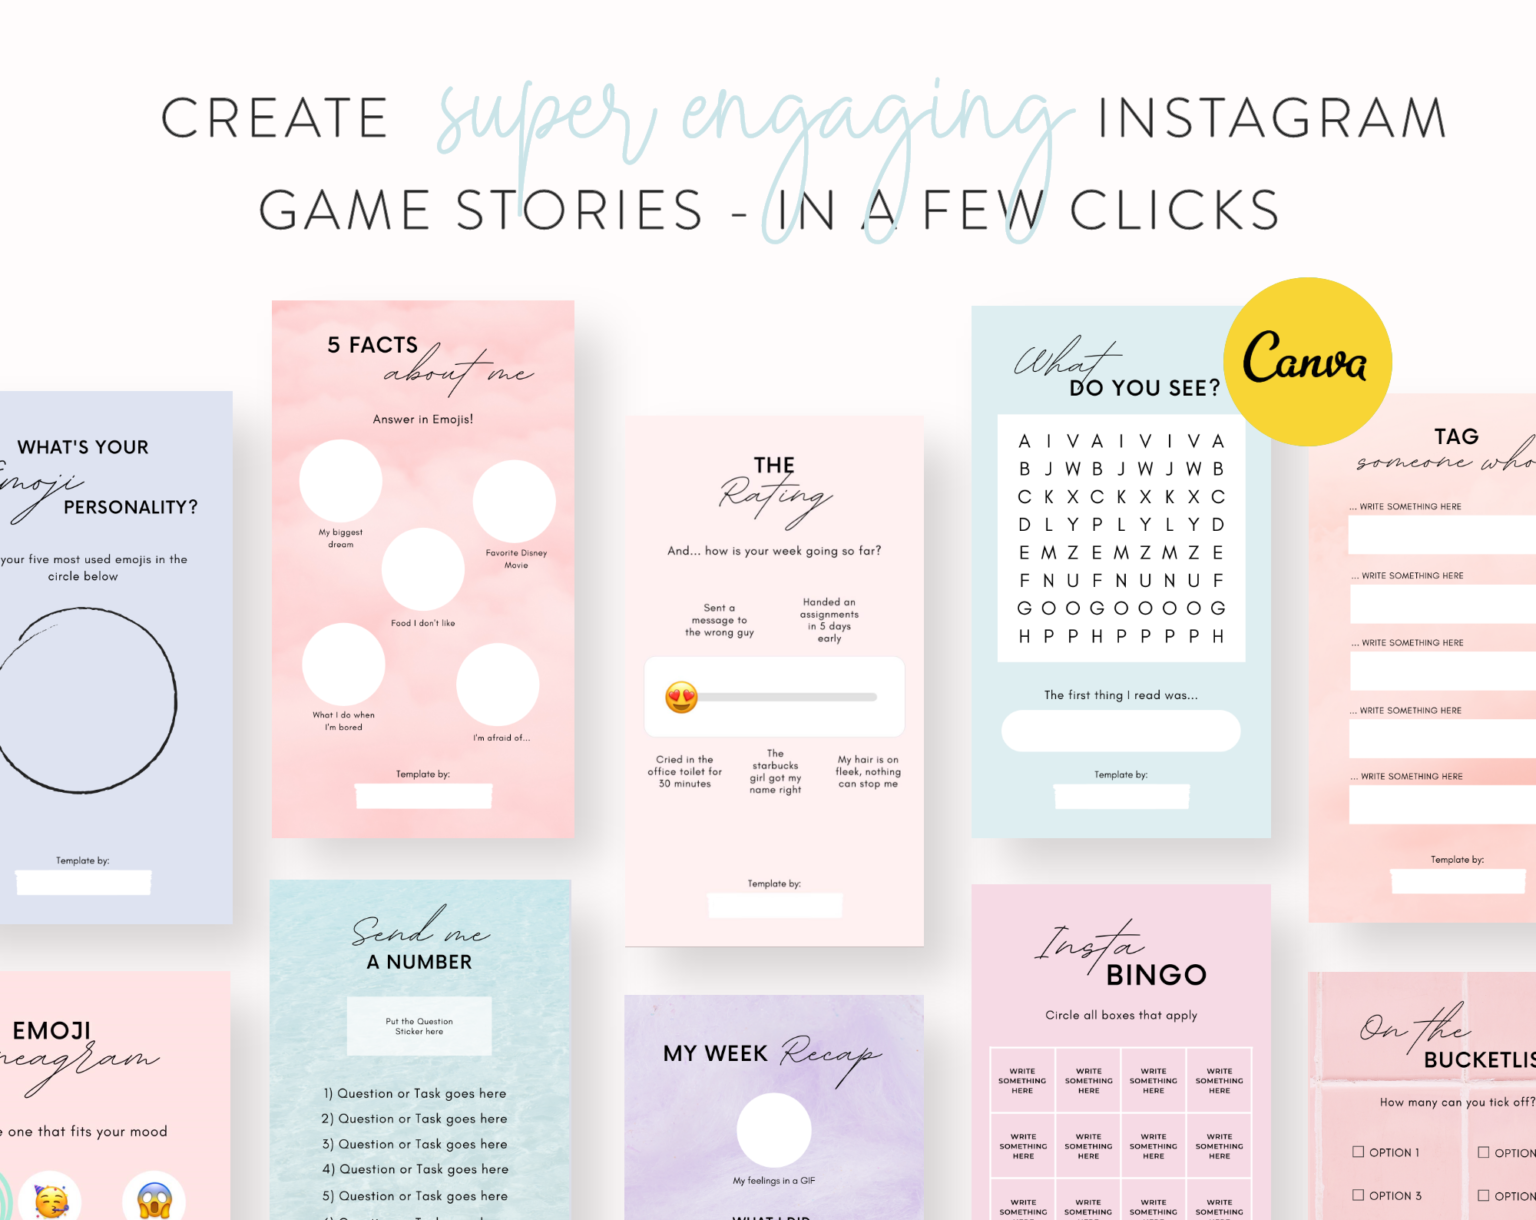 story-games-canva-templates-enagegement-boost